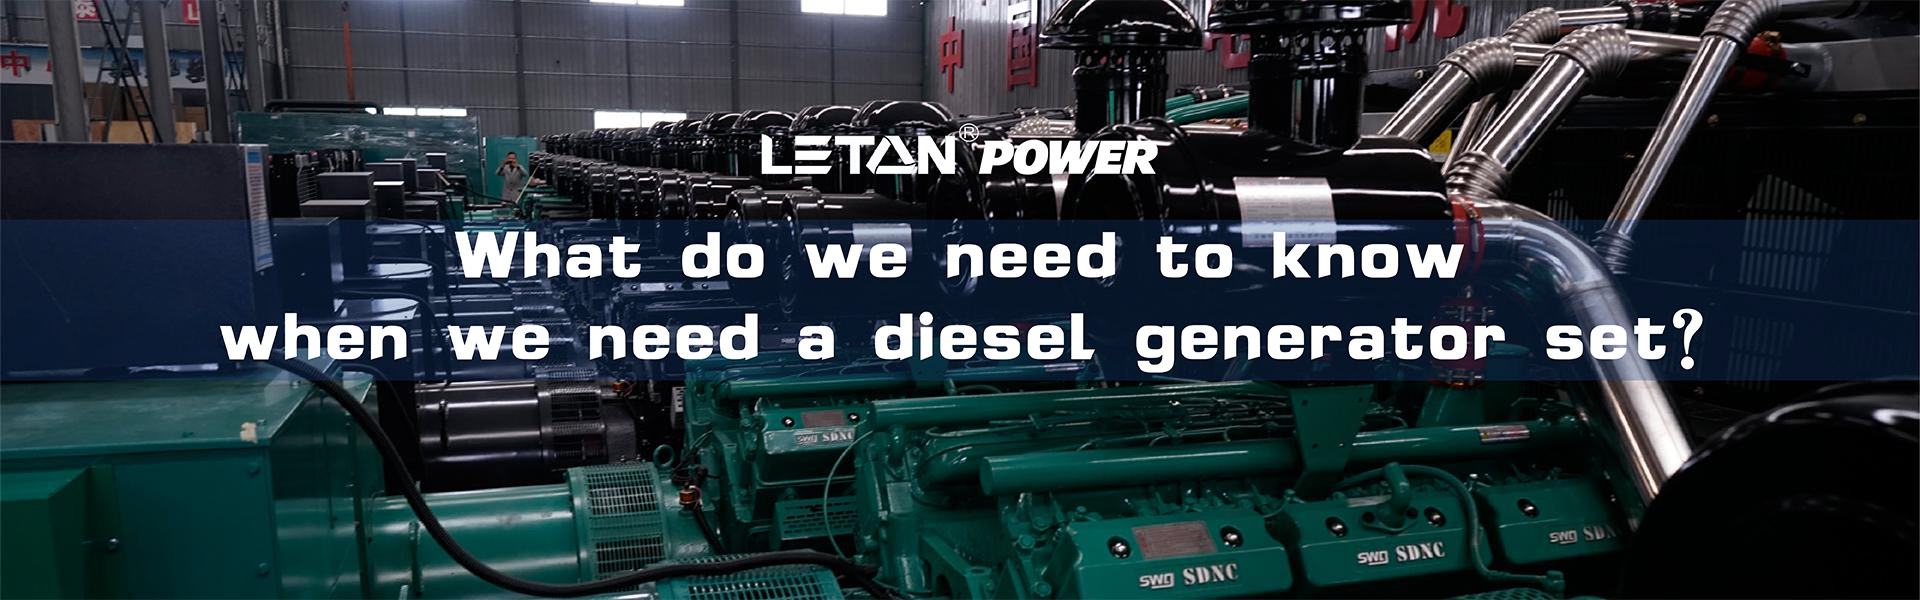 What do we need to know when we buy a diesel generator set?